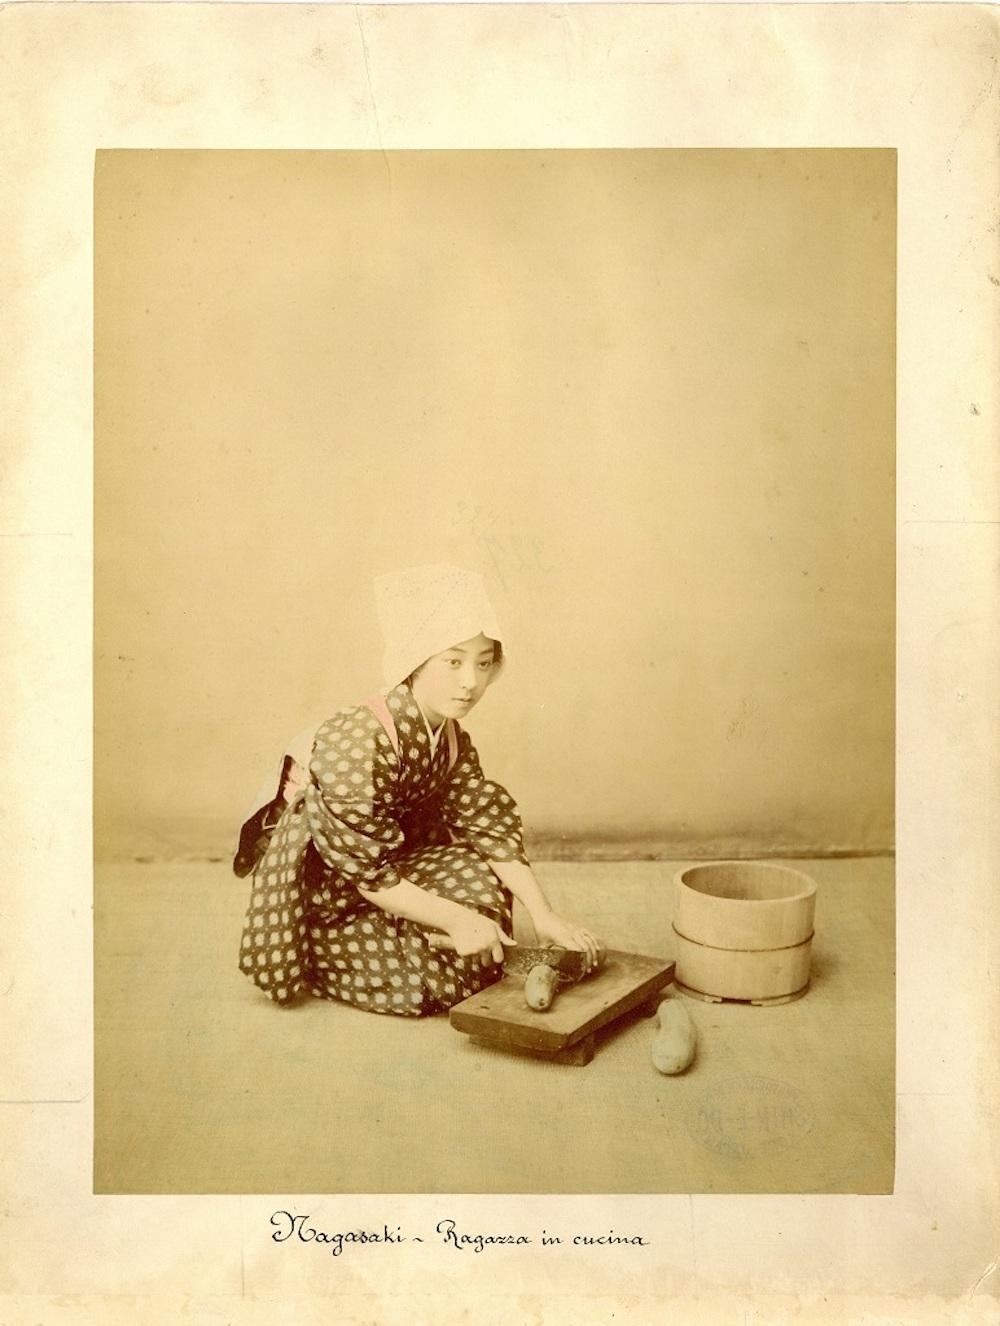 Unknown Black and White Photograph - Japanese Woman Cooking by Shin E Do - Hand-Colored Albumen Print 1870/1890